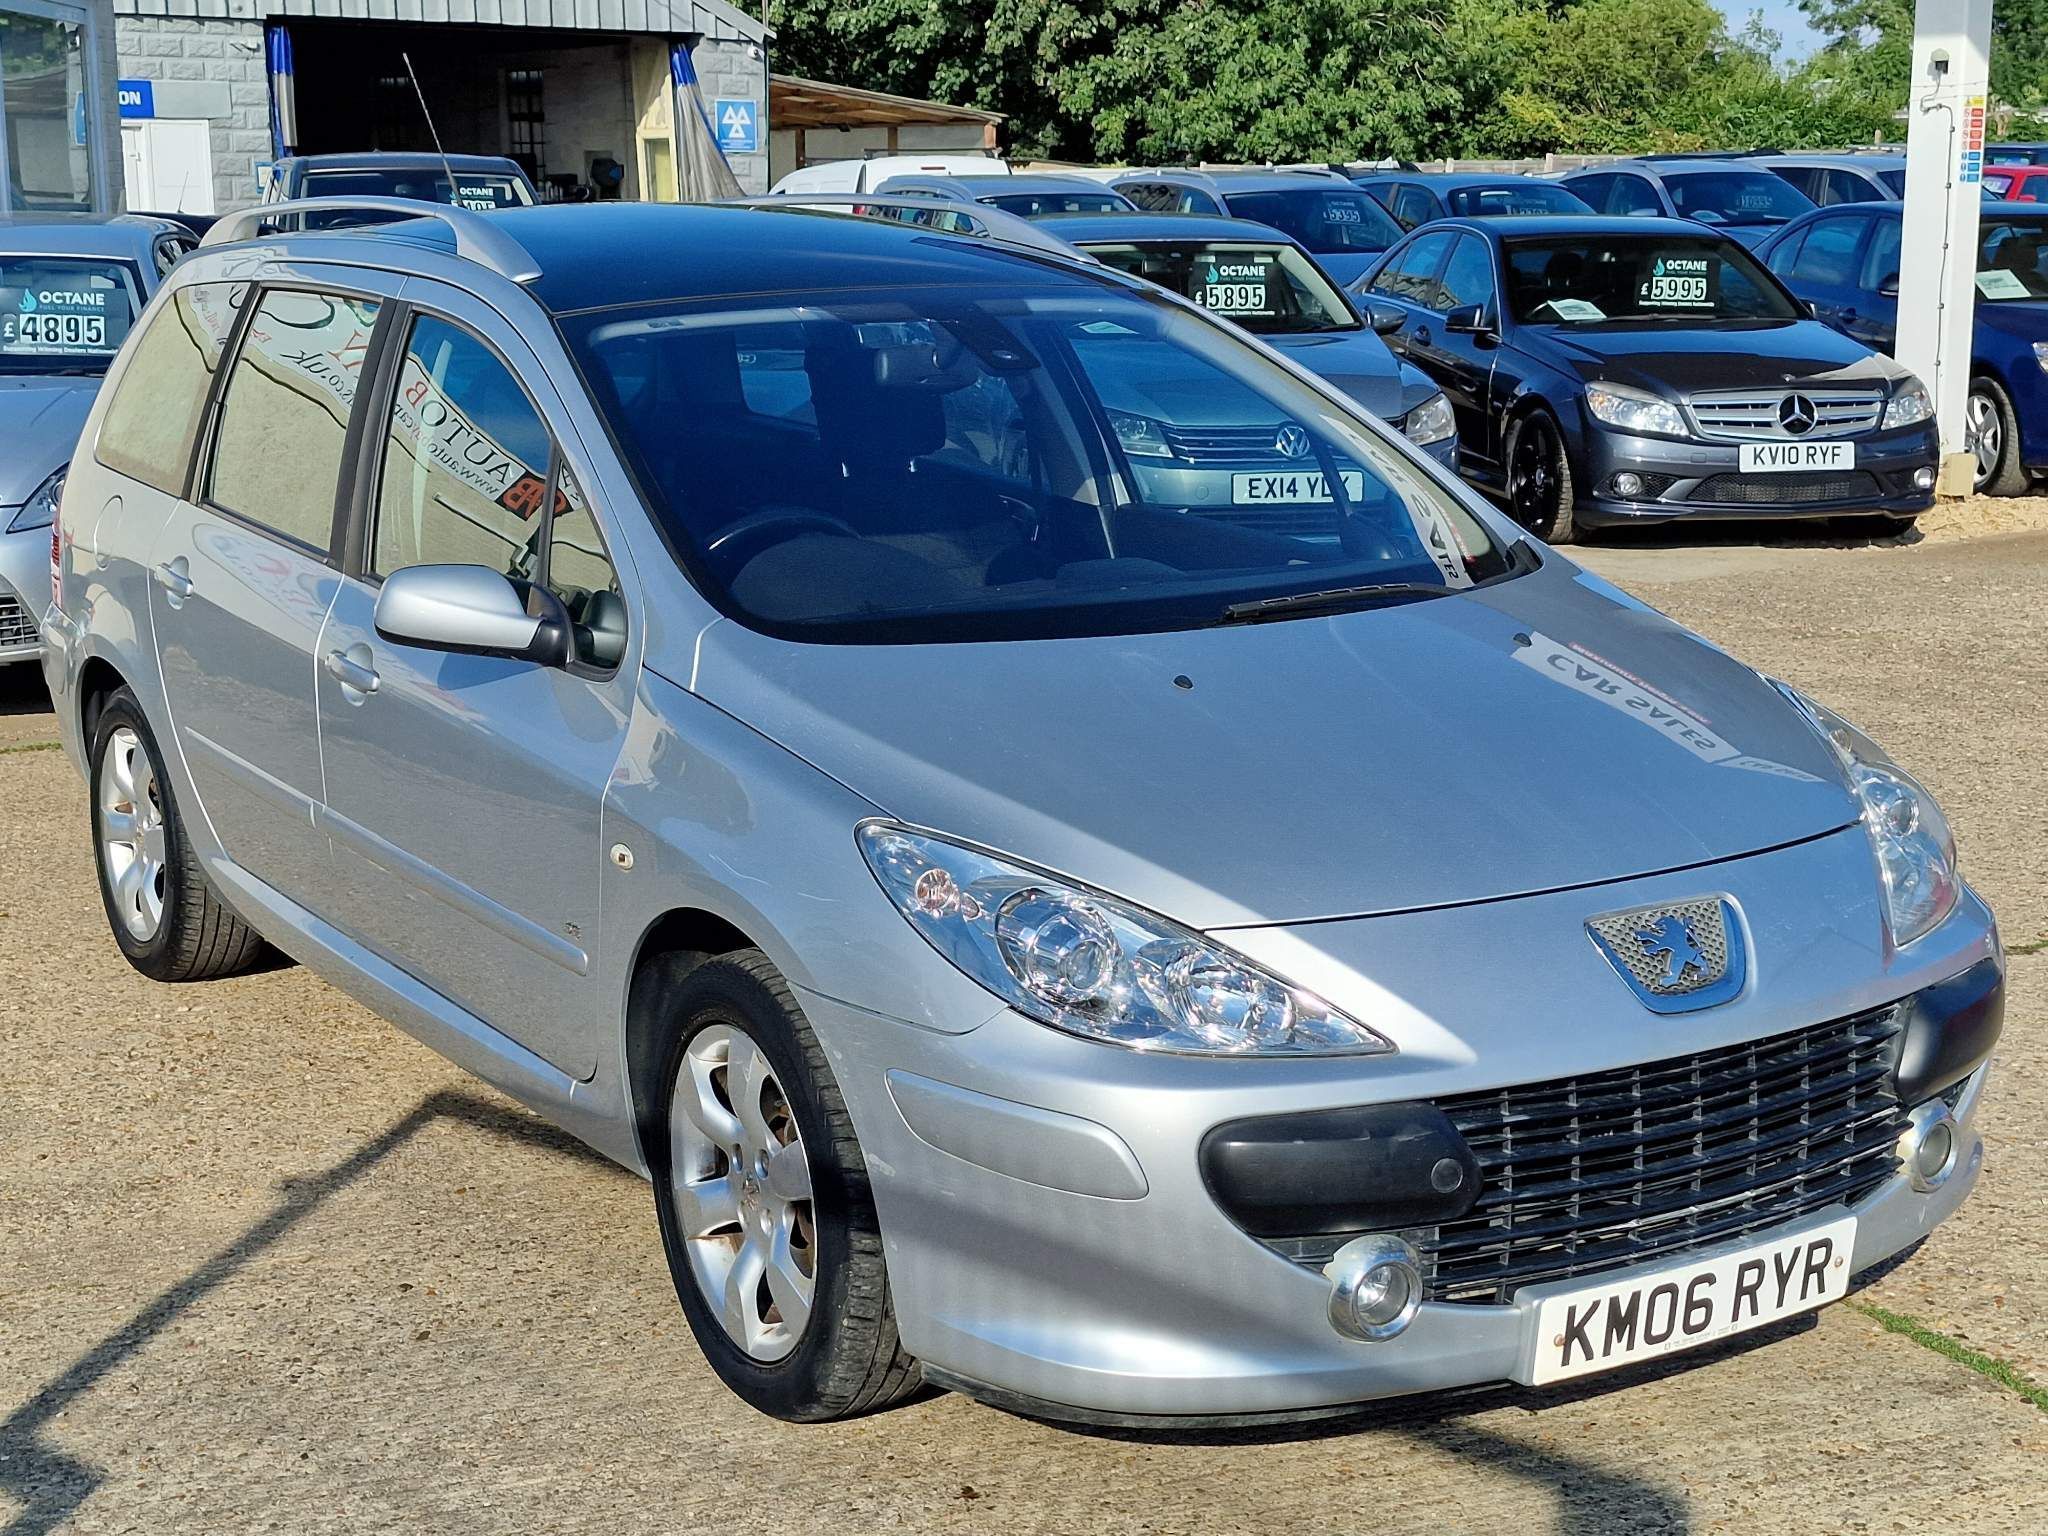 PEUGEOT 307 SW peugeot-307sw Used - the parking